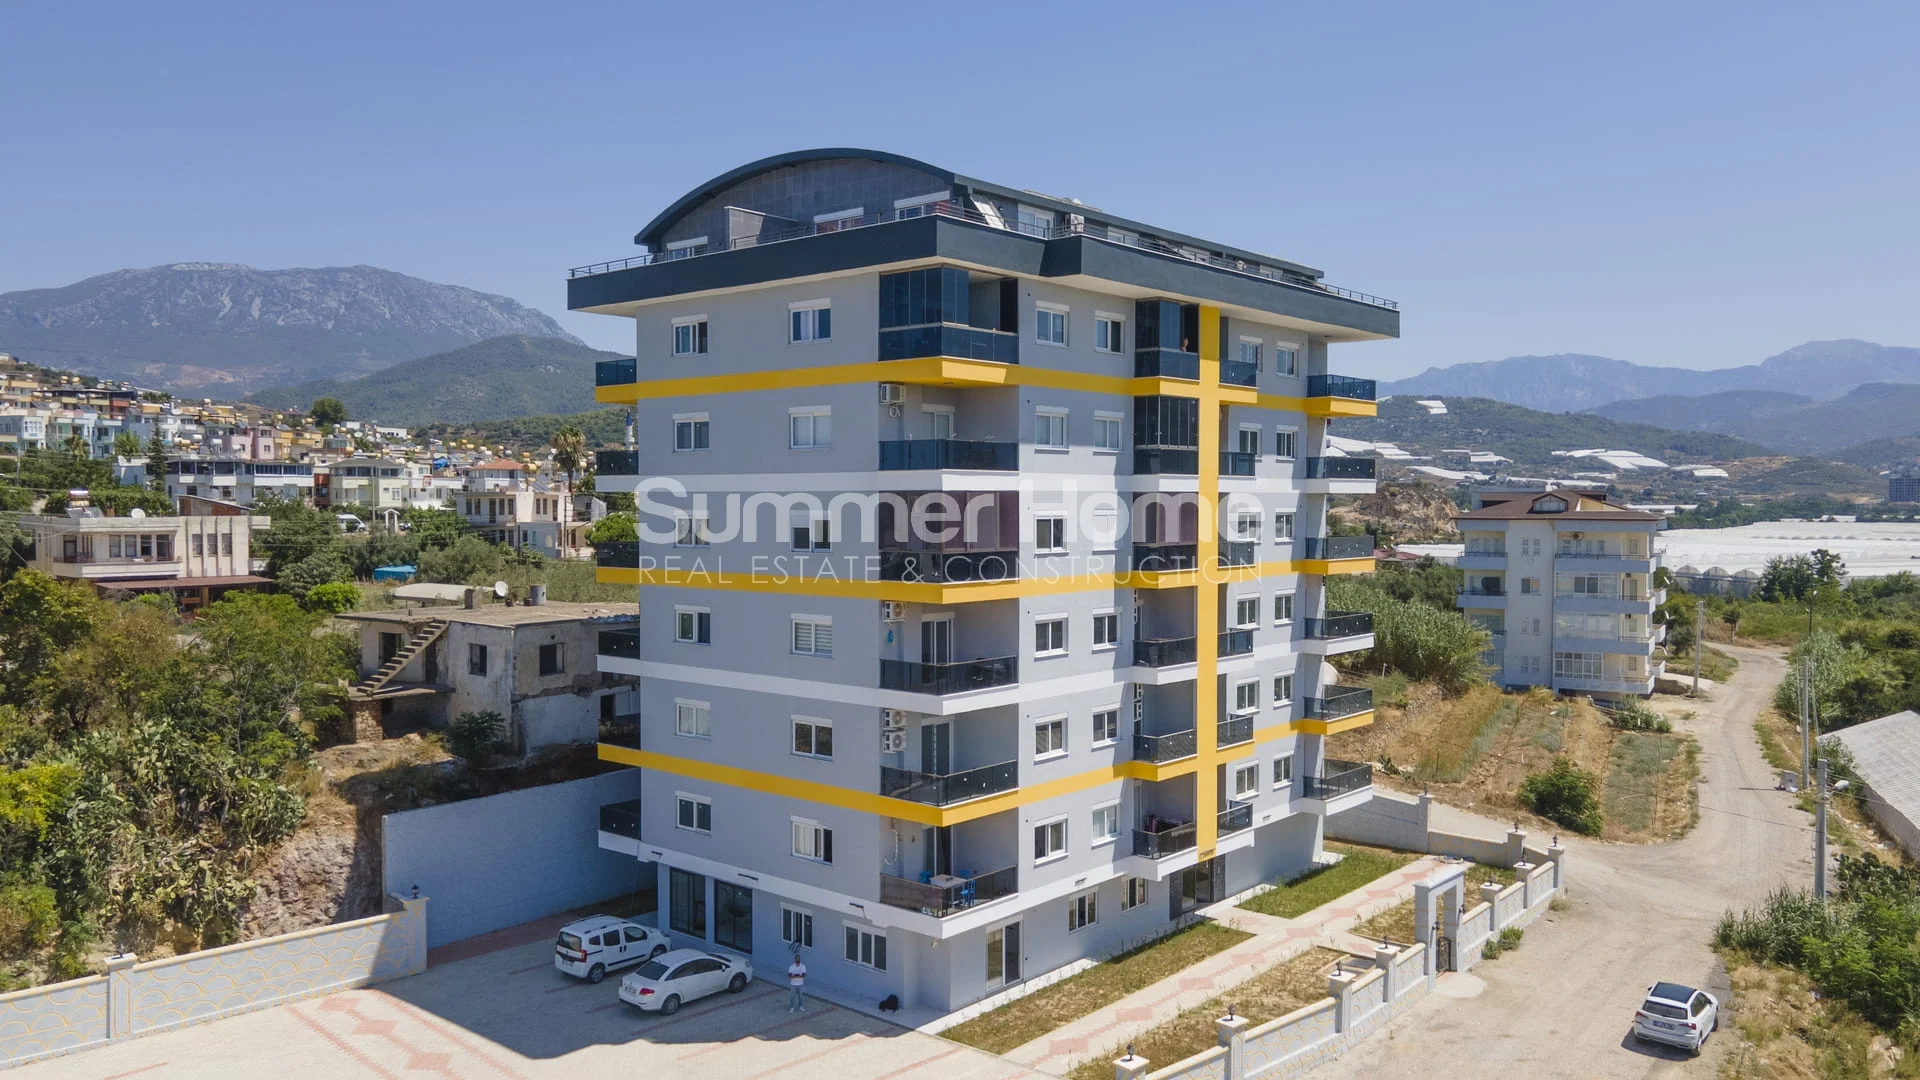 Lovely Sea View Apartments in Demirtas Plan - 23